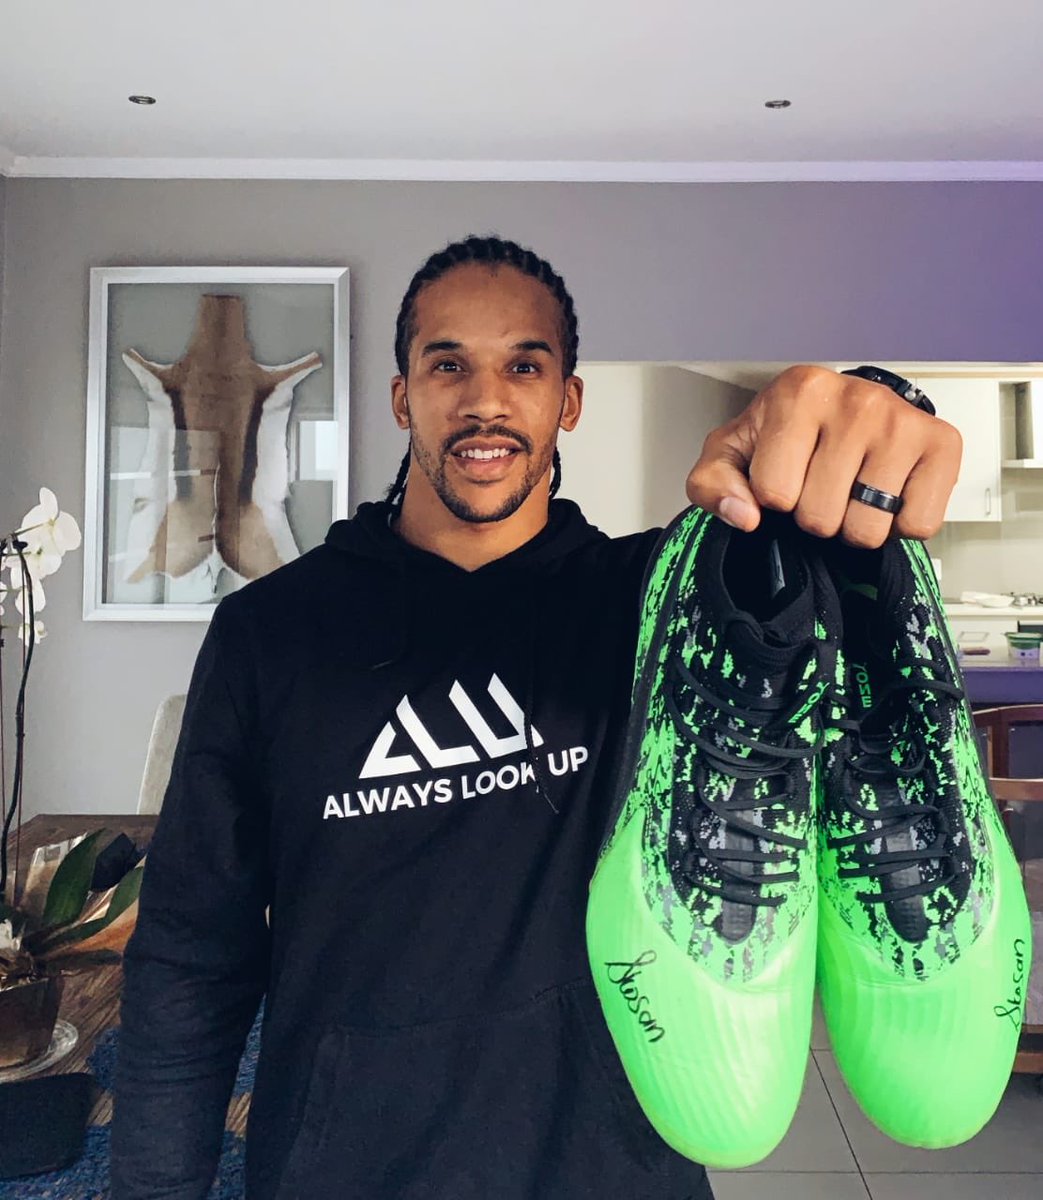 Order any ALU item online at skosanapparel.com and stand a chance to win this autographed pair of boots! You have to order before 31 July 2019.